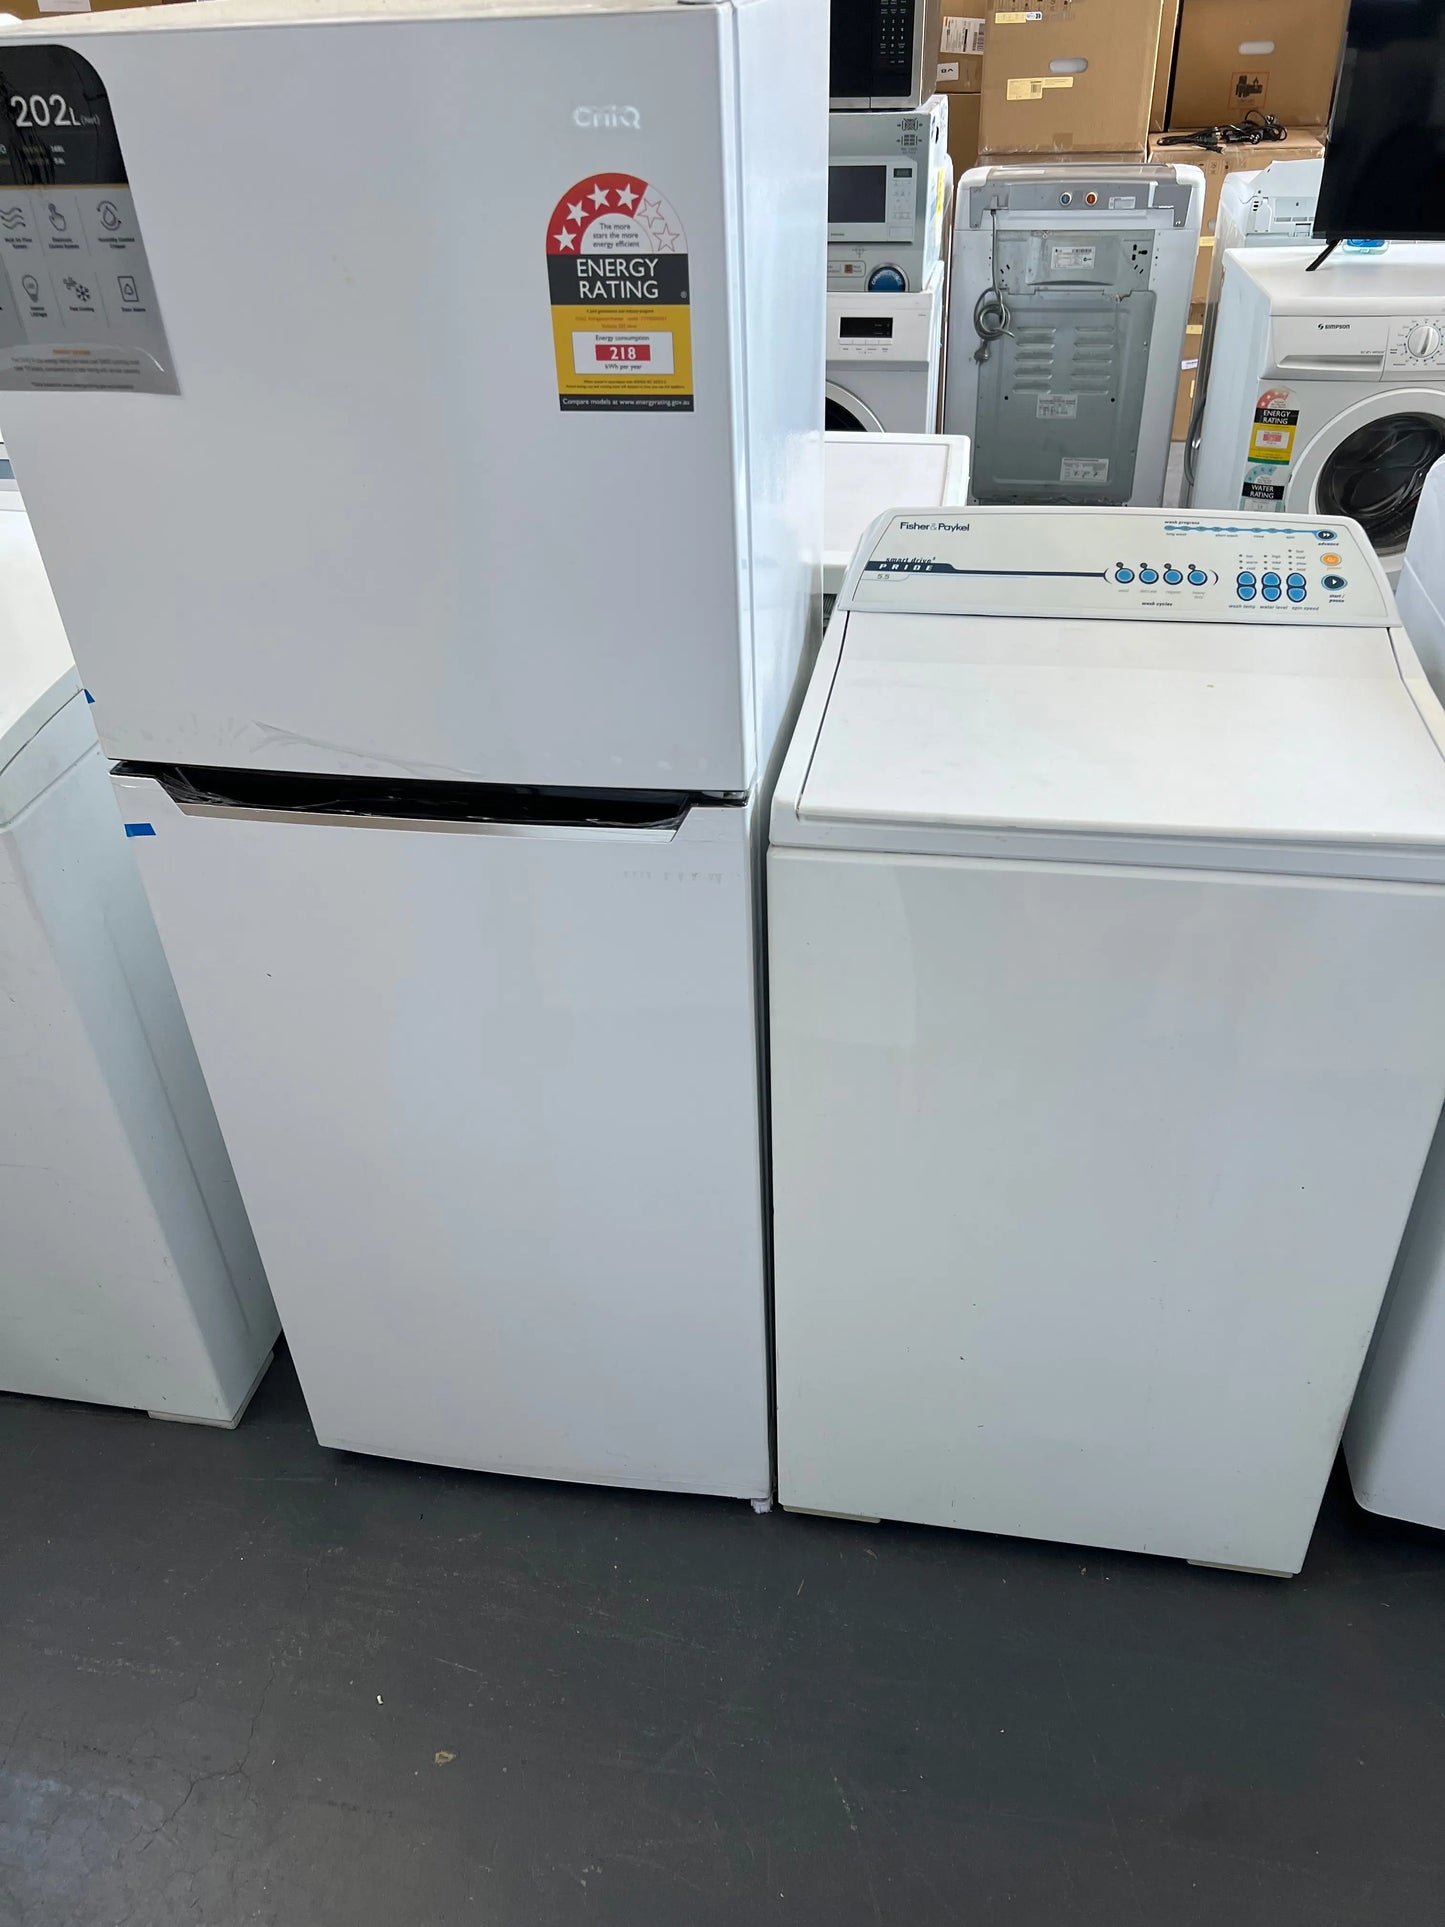 Chiq 202 litres fridge freezer and fisher and paykel 5.5kg washing machine | ADELAIDE